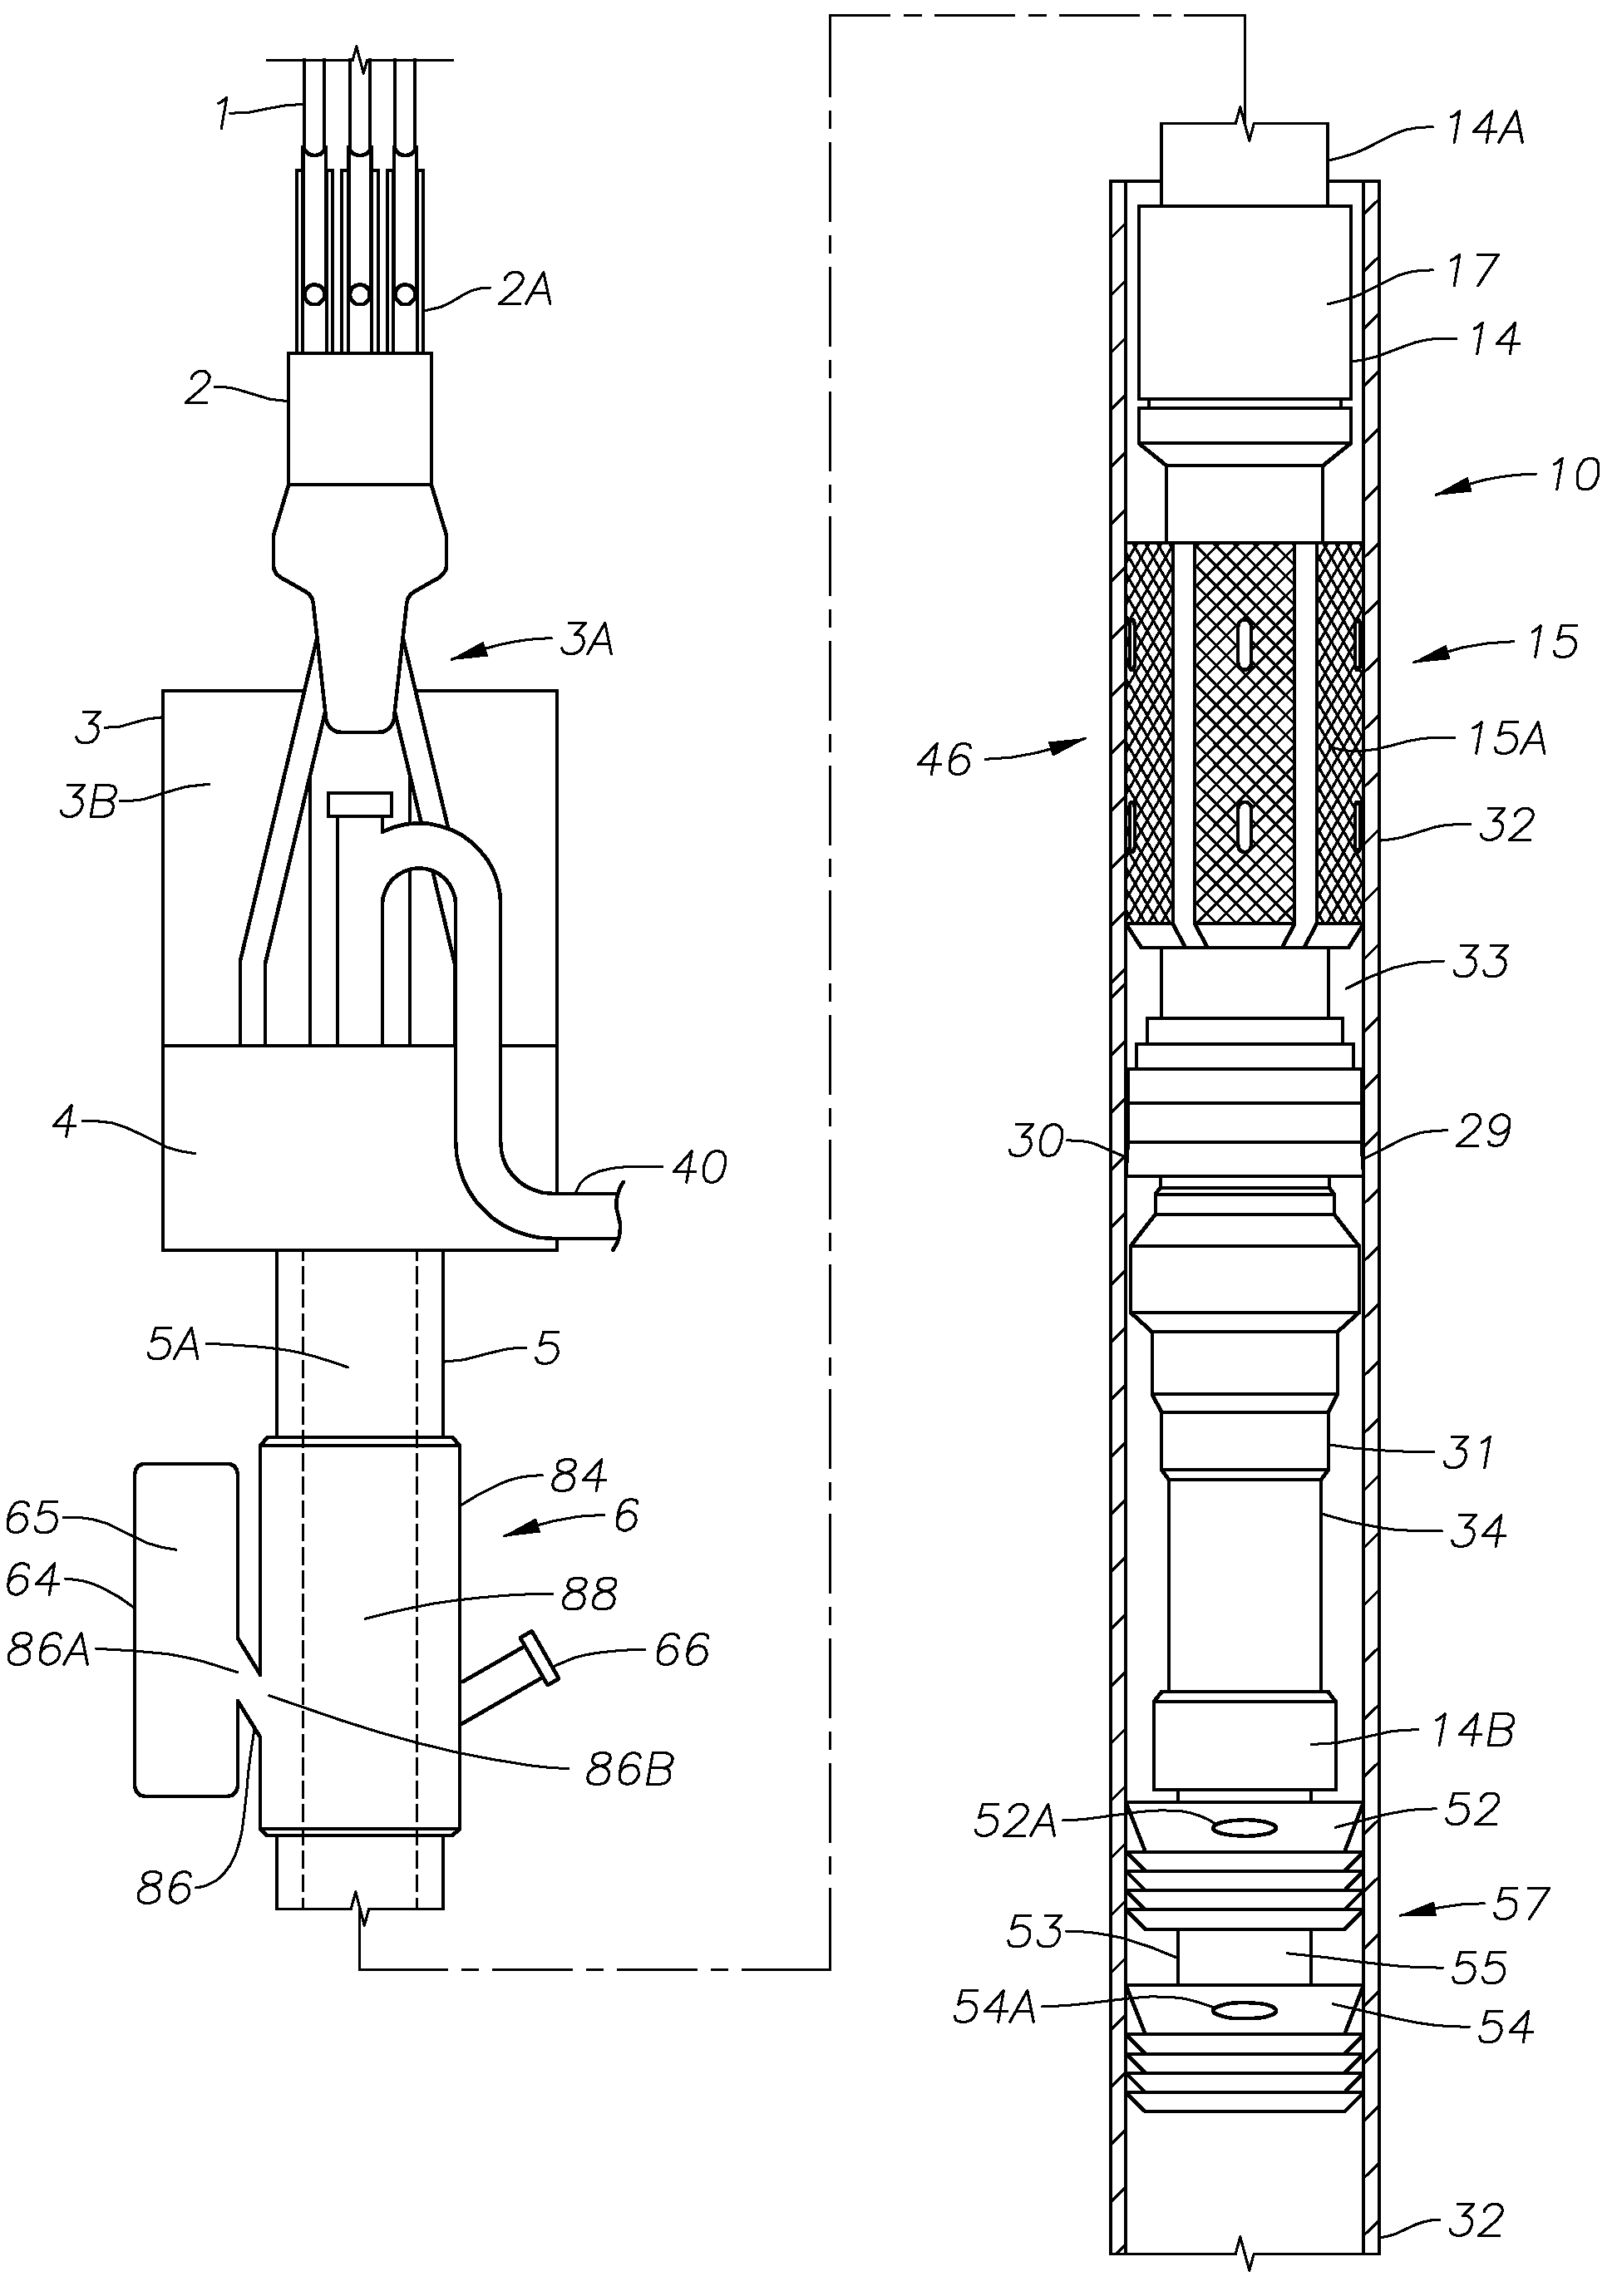 Casing make-up and running tool adapted for fluid and cement control